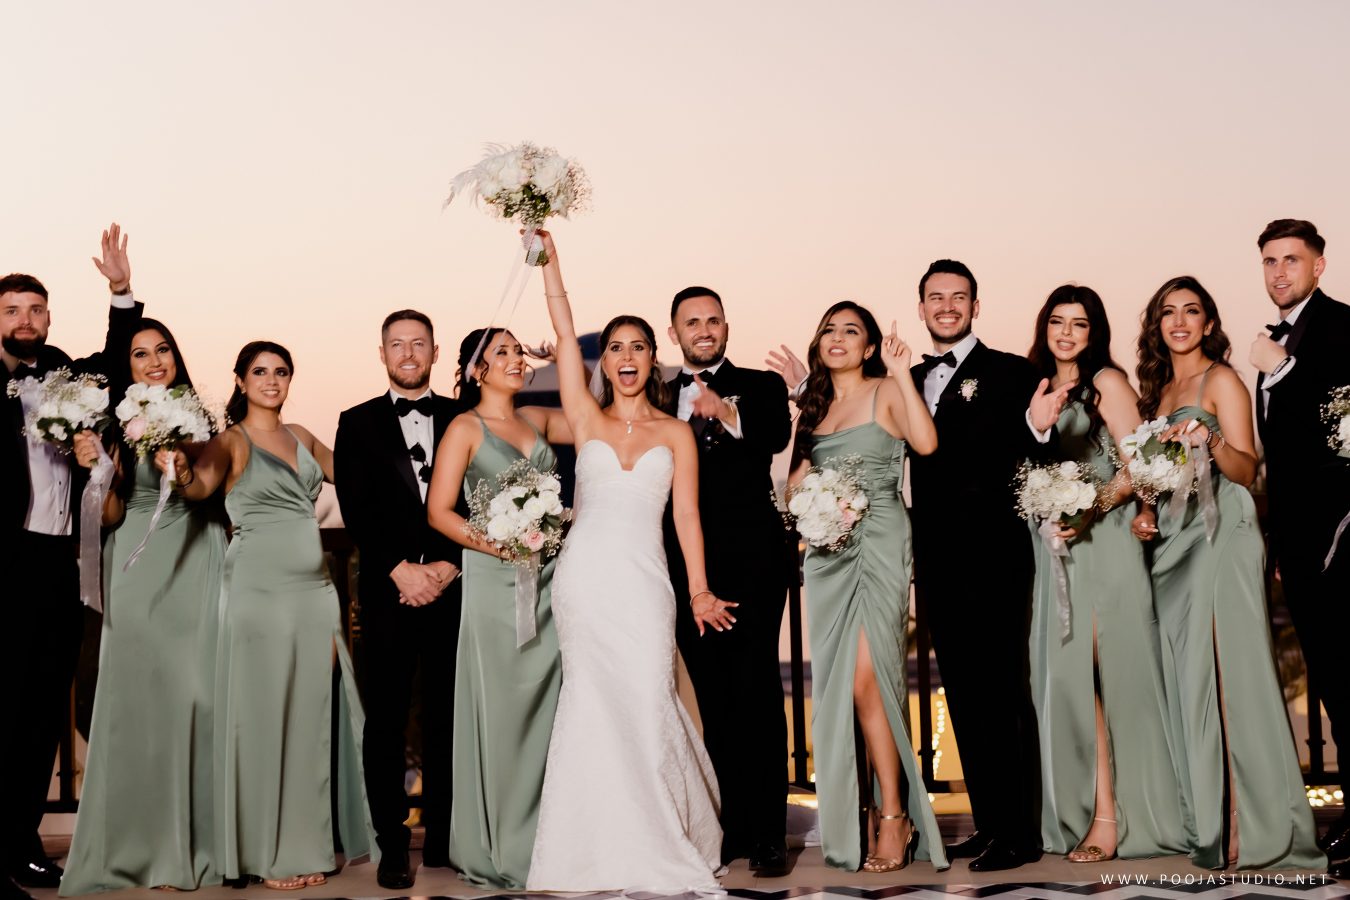 A wedding party with the couple, bridesmaids and groomsmen